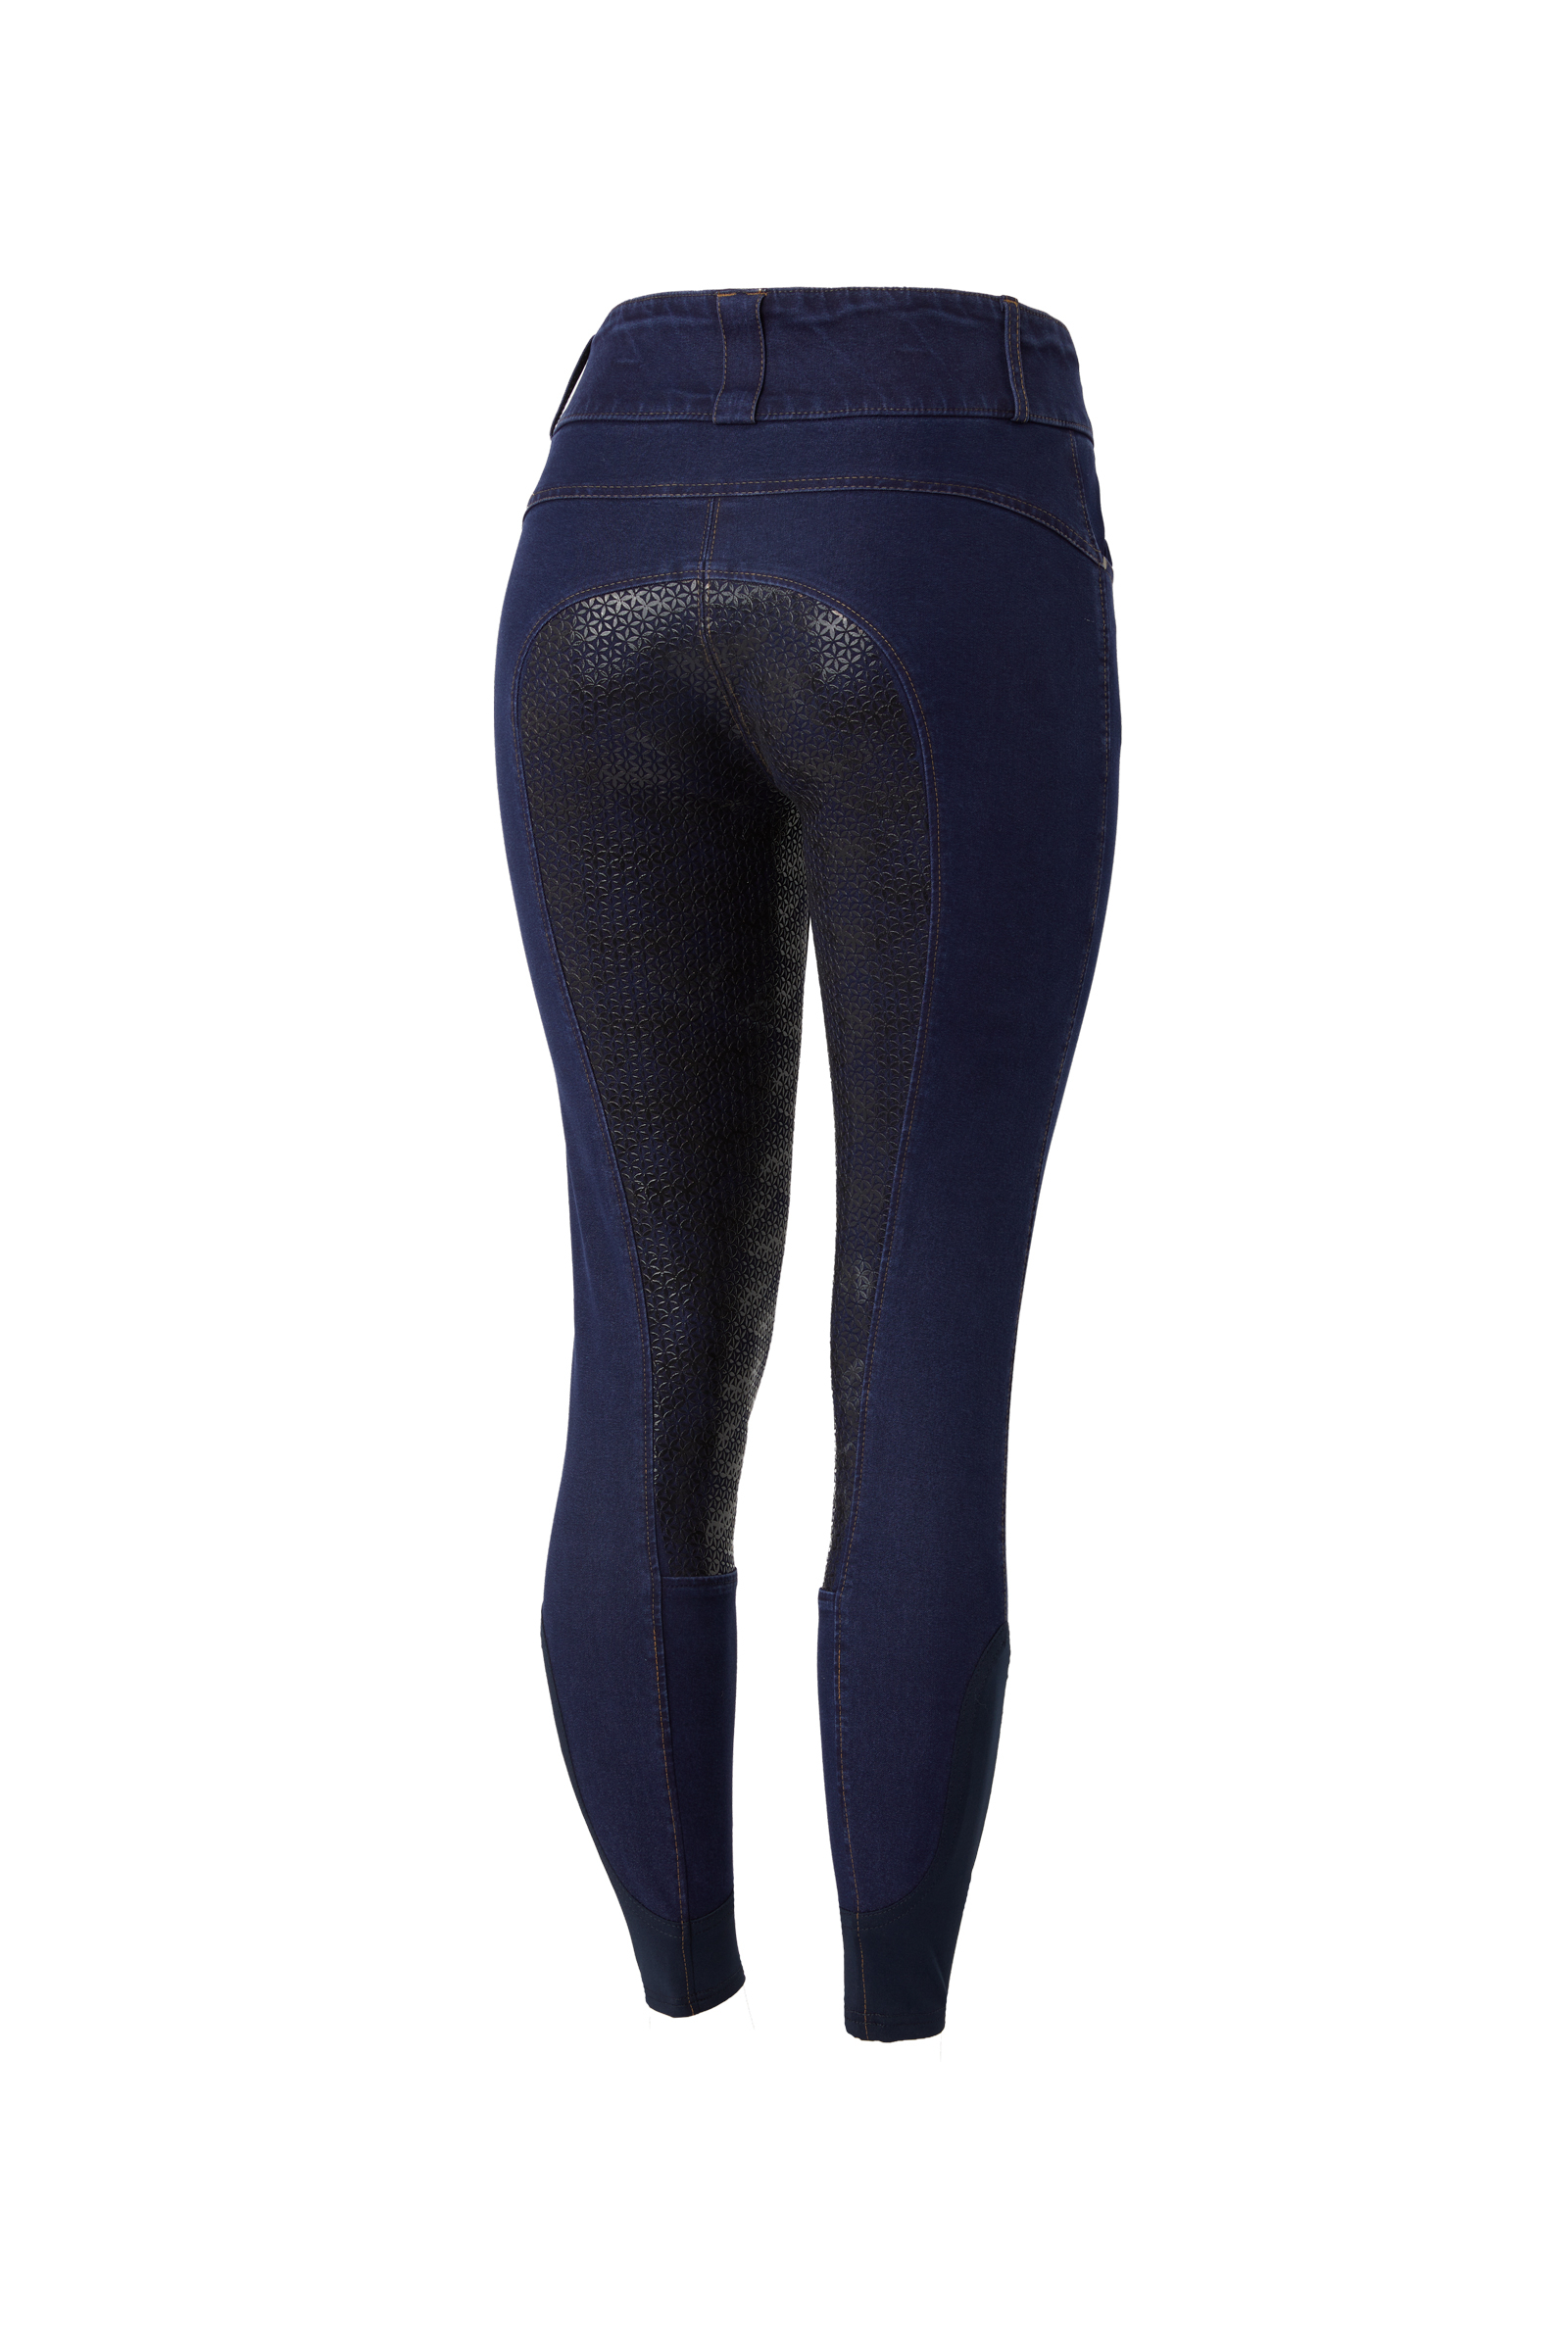 Fashionable Breeches Jodhpurs Leggings & Jeggings - Ladies Horse Riding  Tights Very Comfy & Stretchable With Anti Slip Silicone Seat Manufacturer  from Kanpur